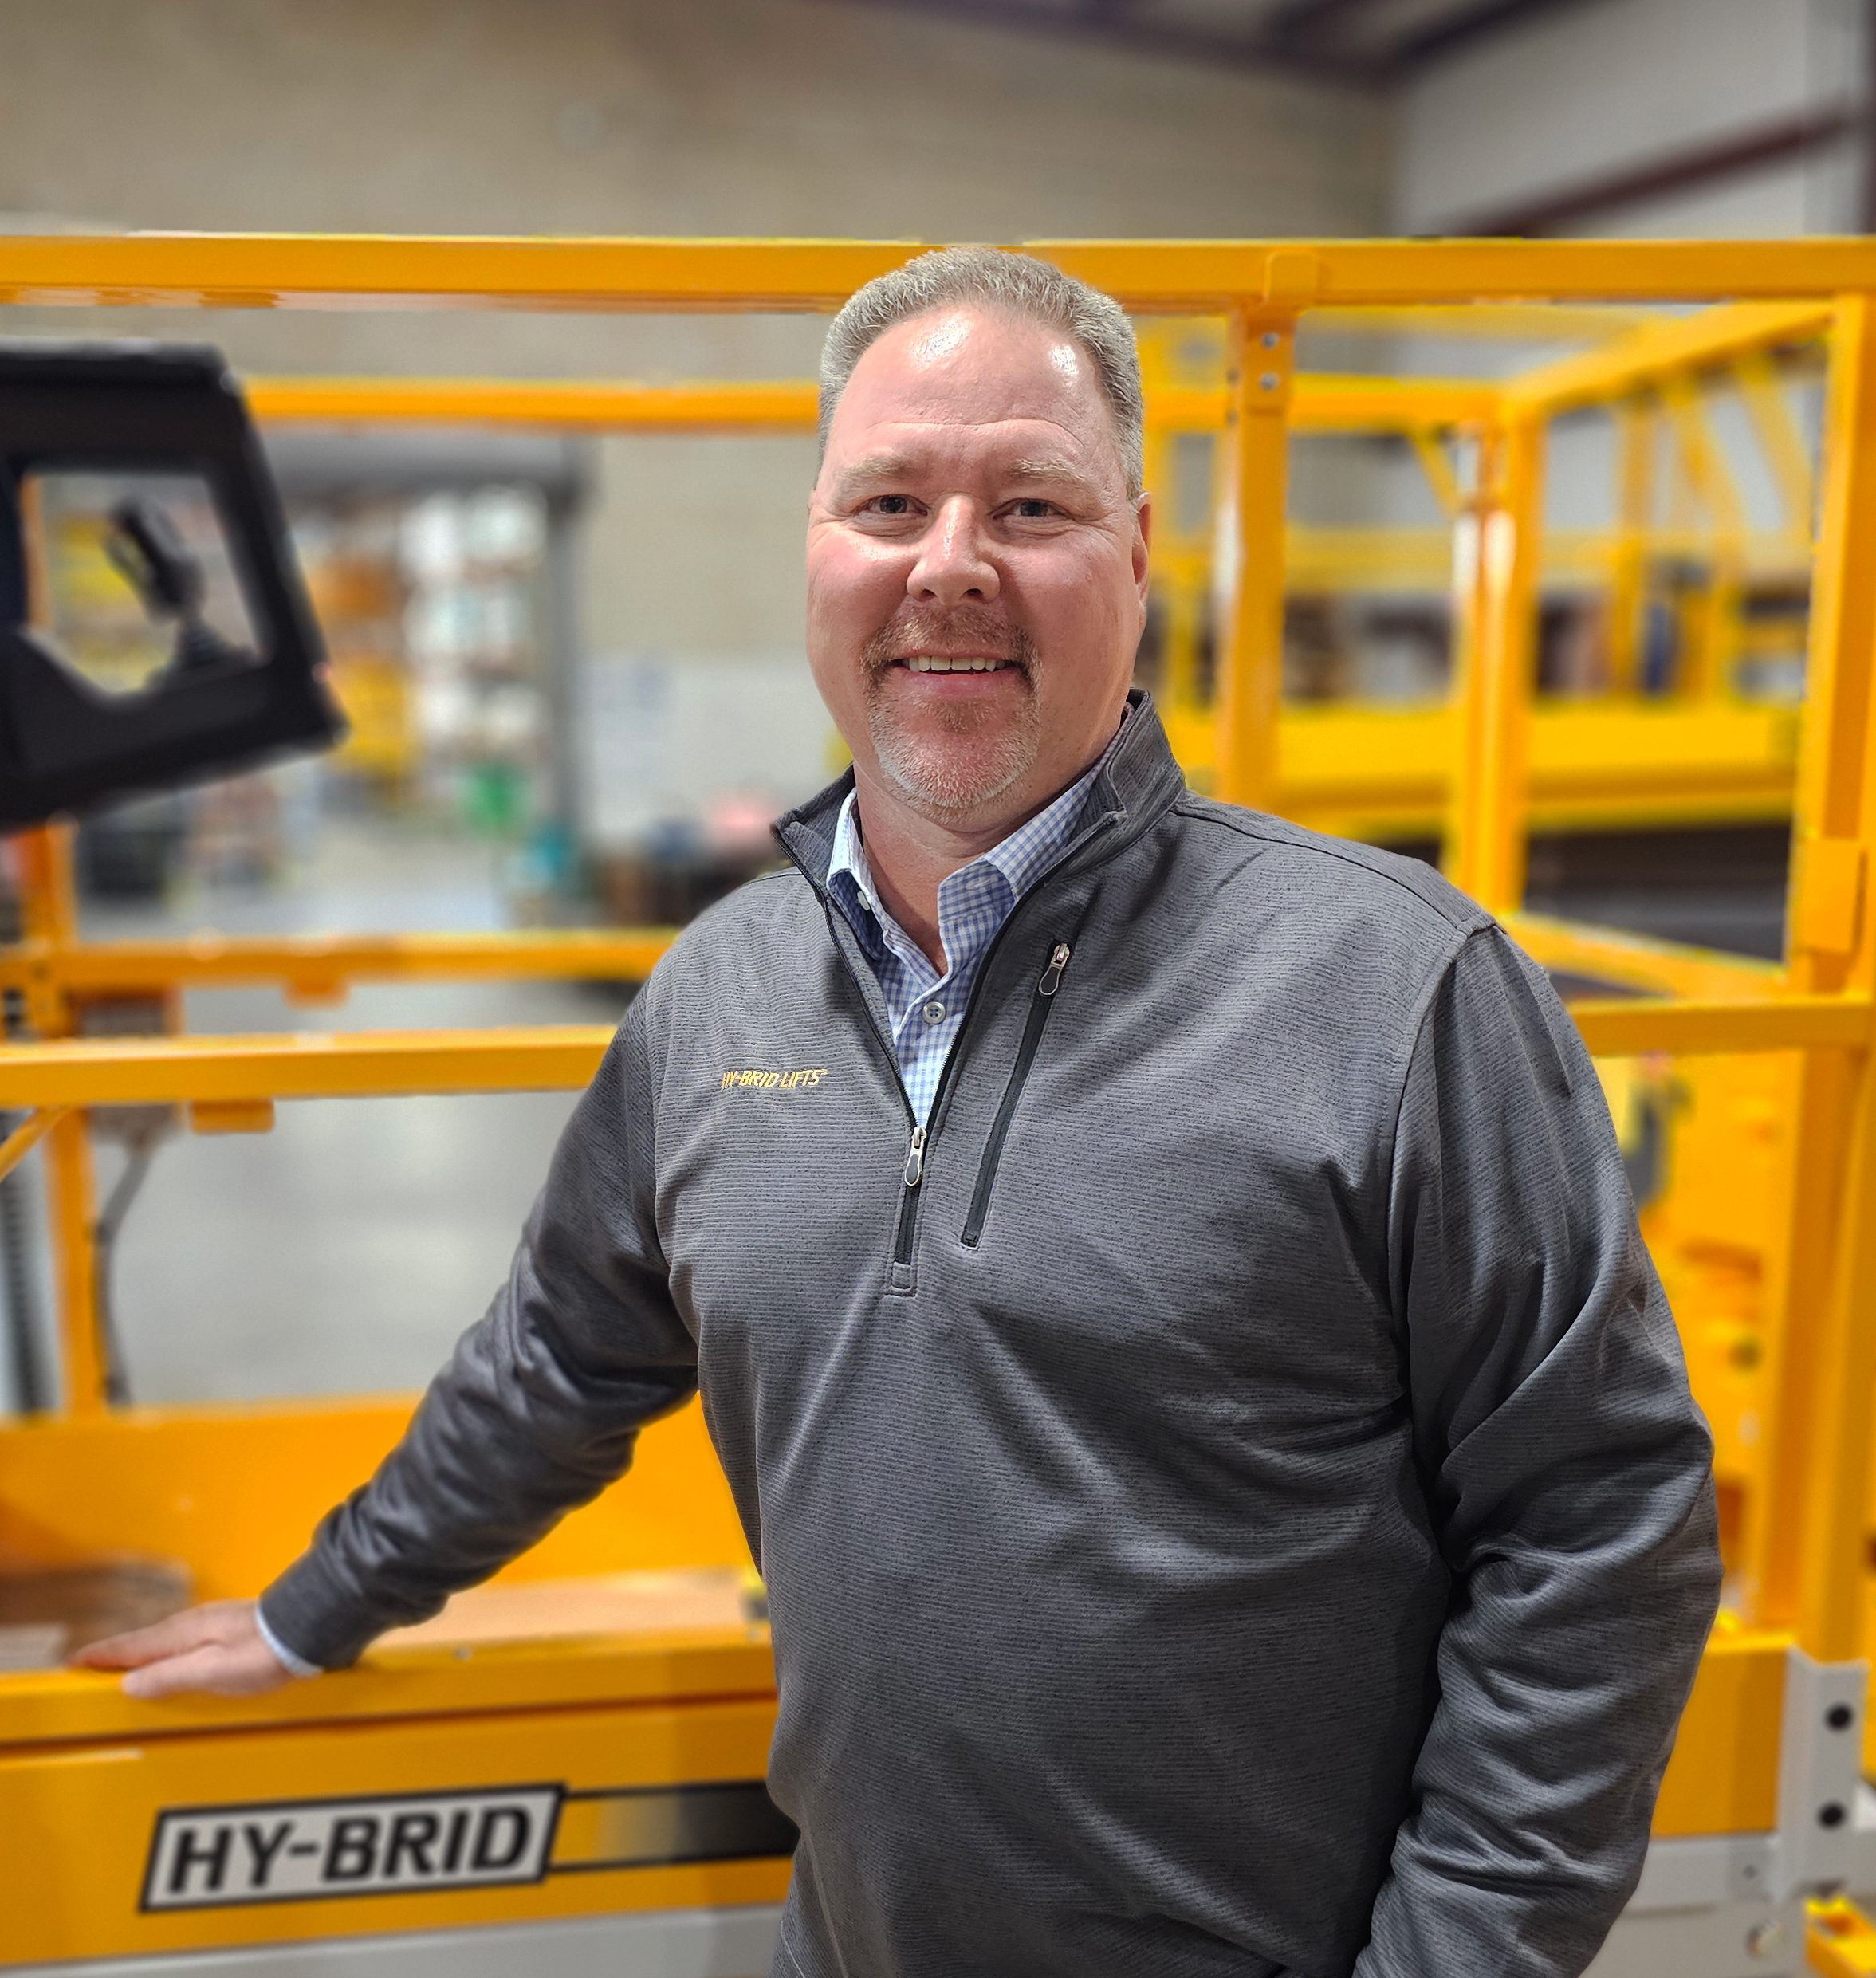 Hy-Brid Lifts Appoints New President and CEO